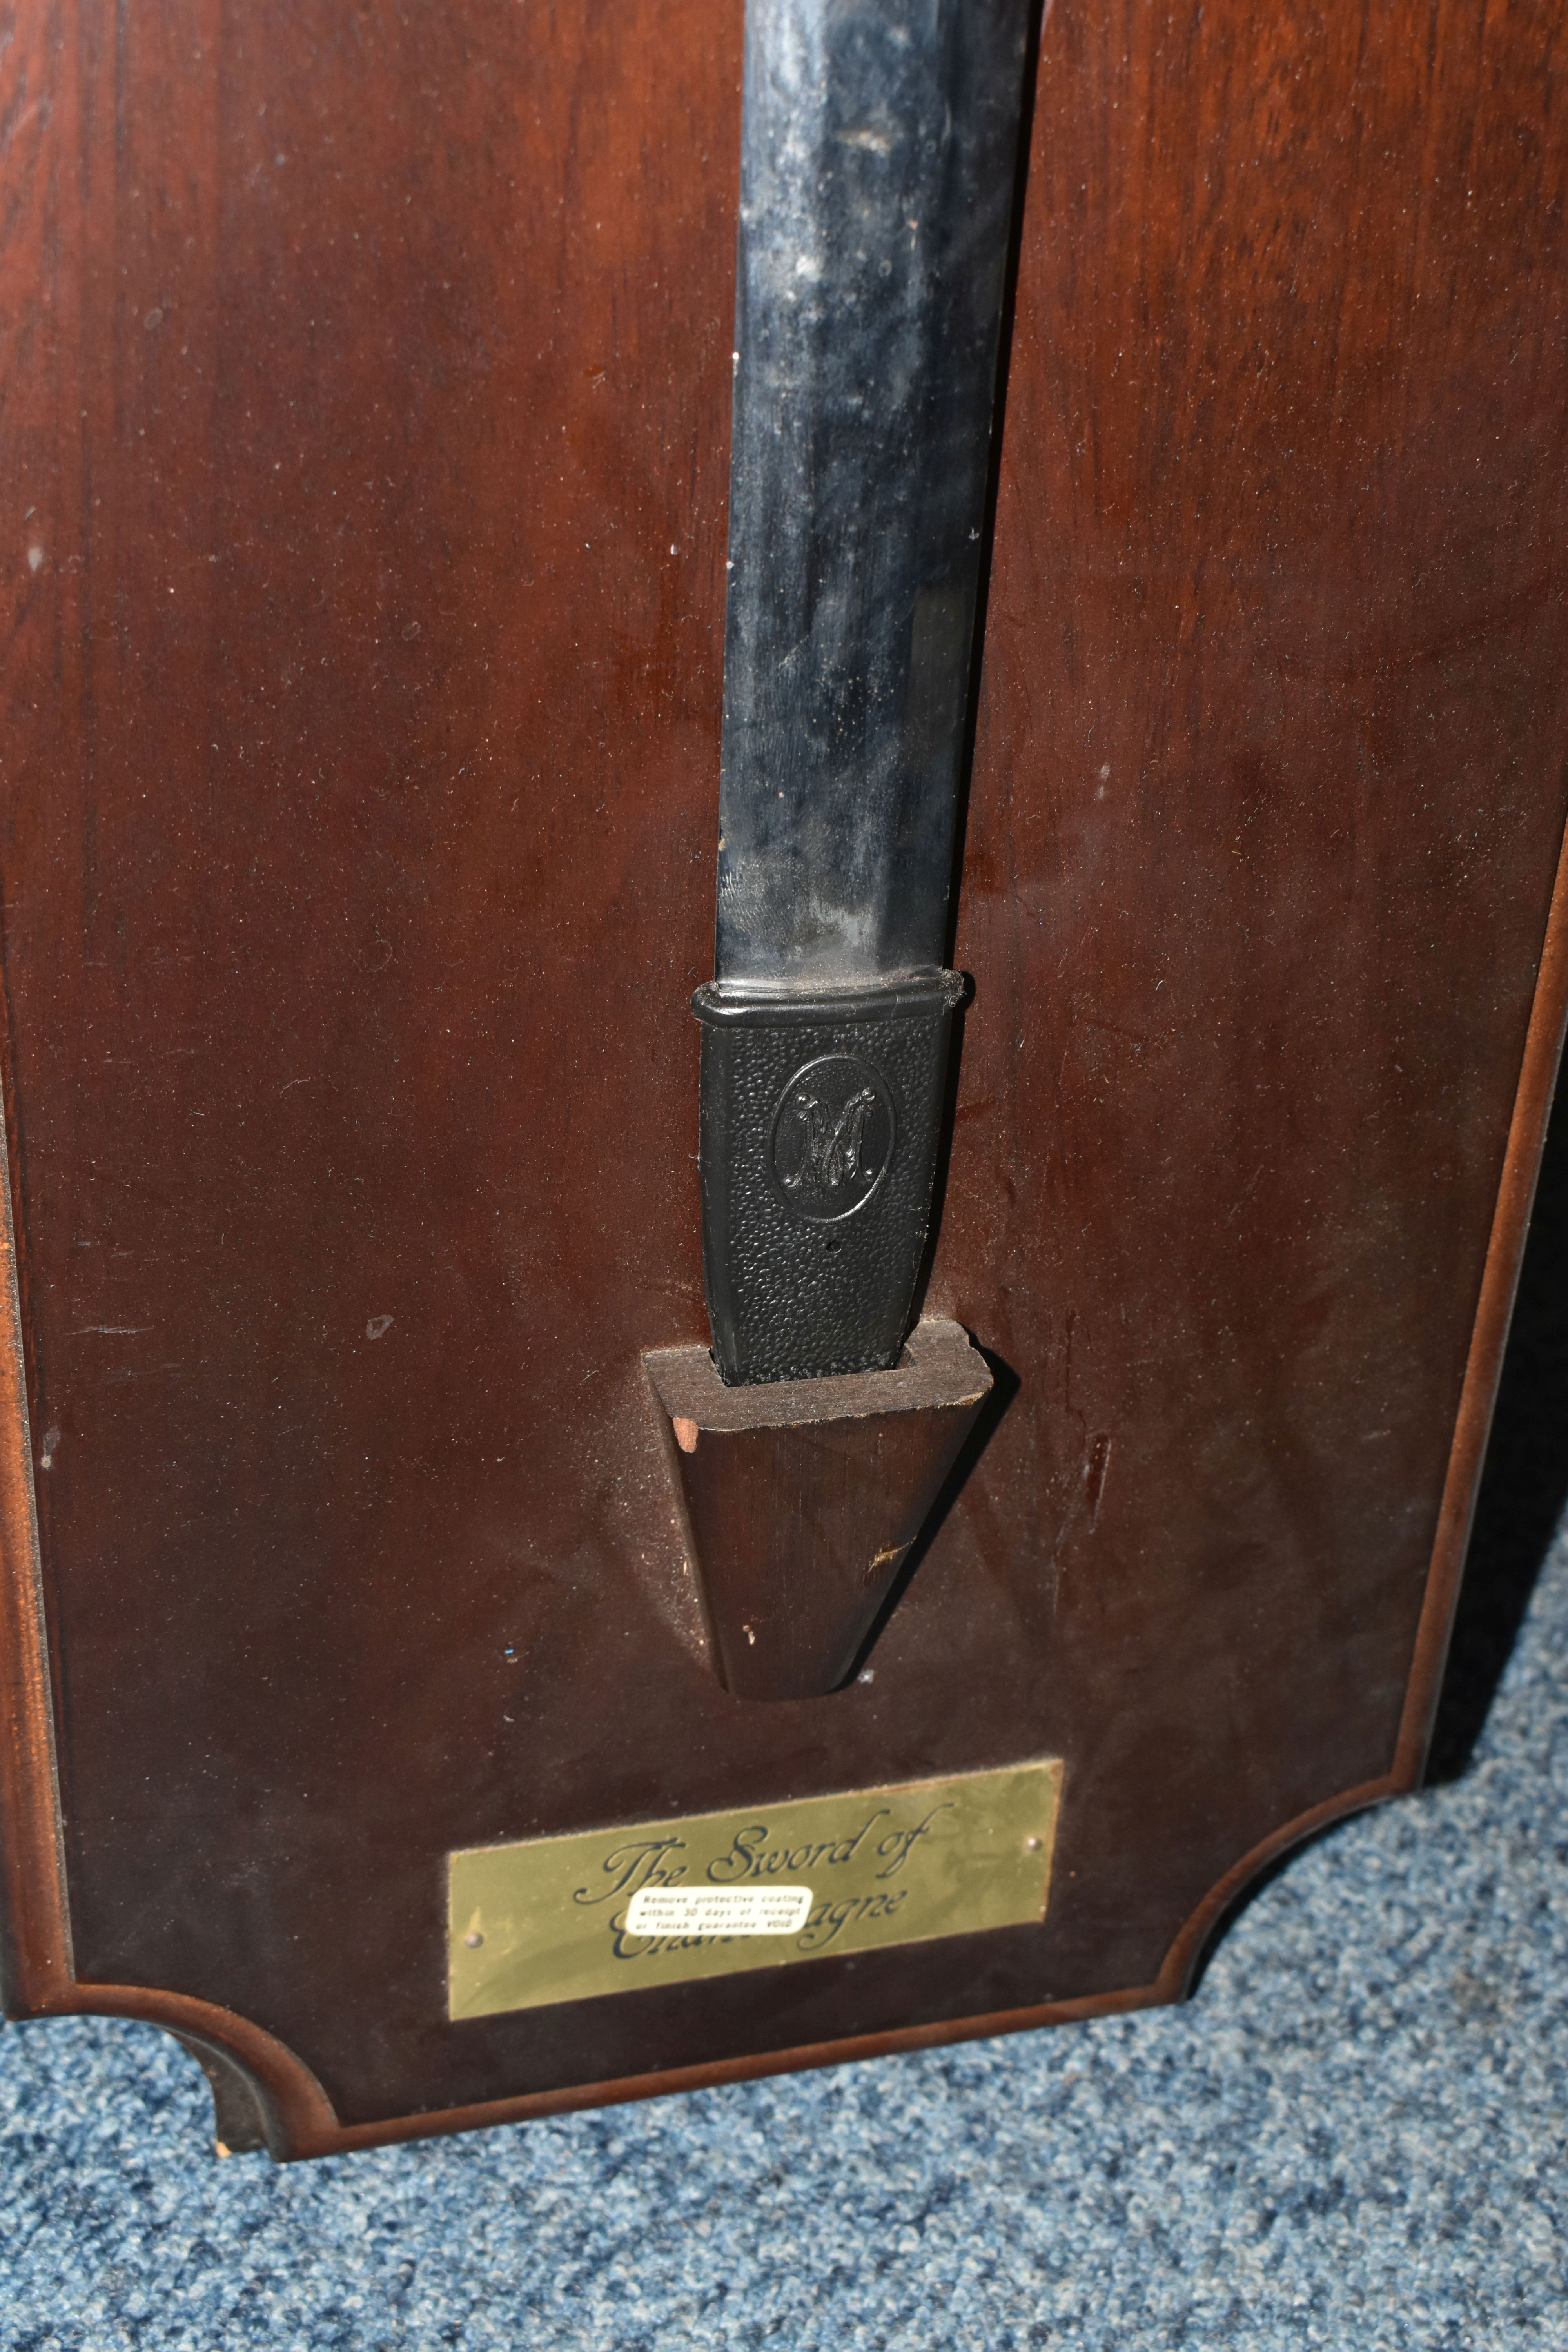 A REPRODUCTION FRANKLIN MINT SWORD OF CHARLEMAGNE WITH WOODEN DISPLAY BOARD AND CERTIFICATE, gold - Image 6 of 6